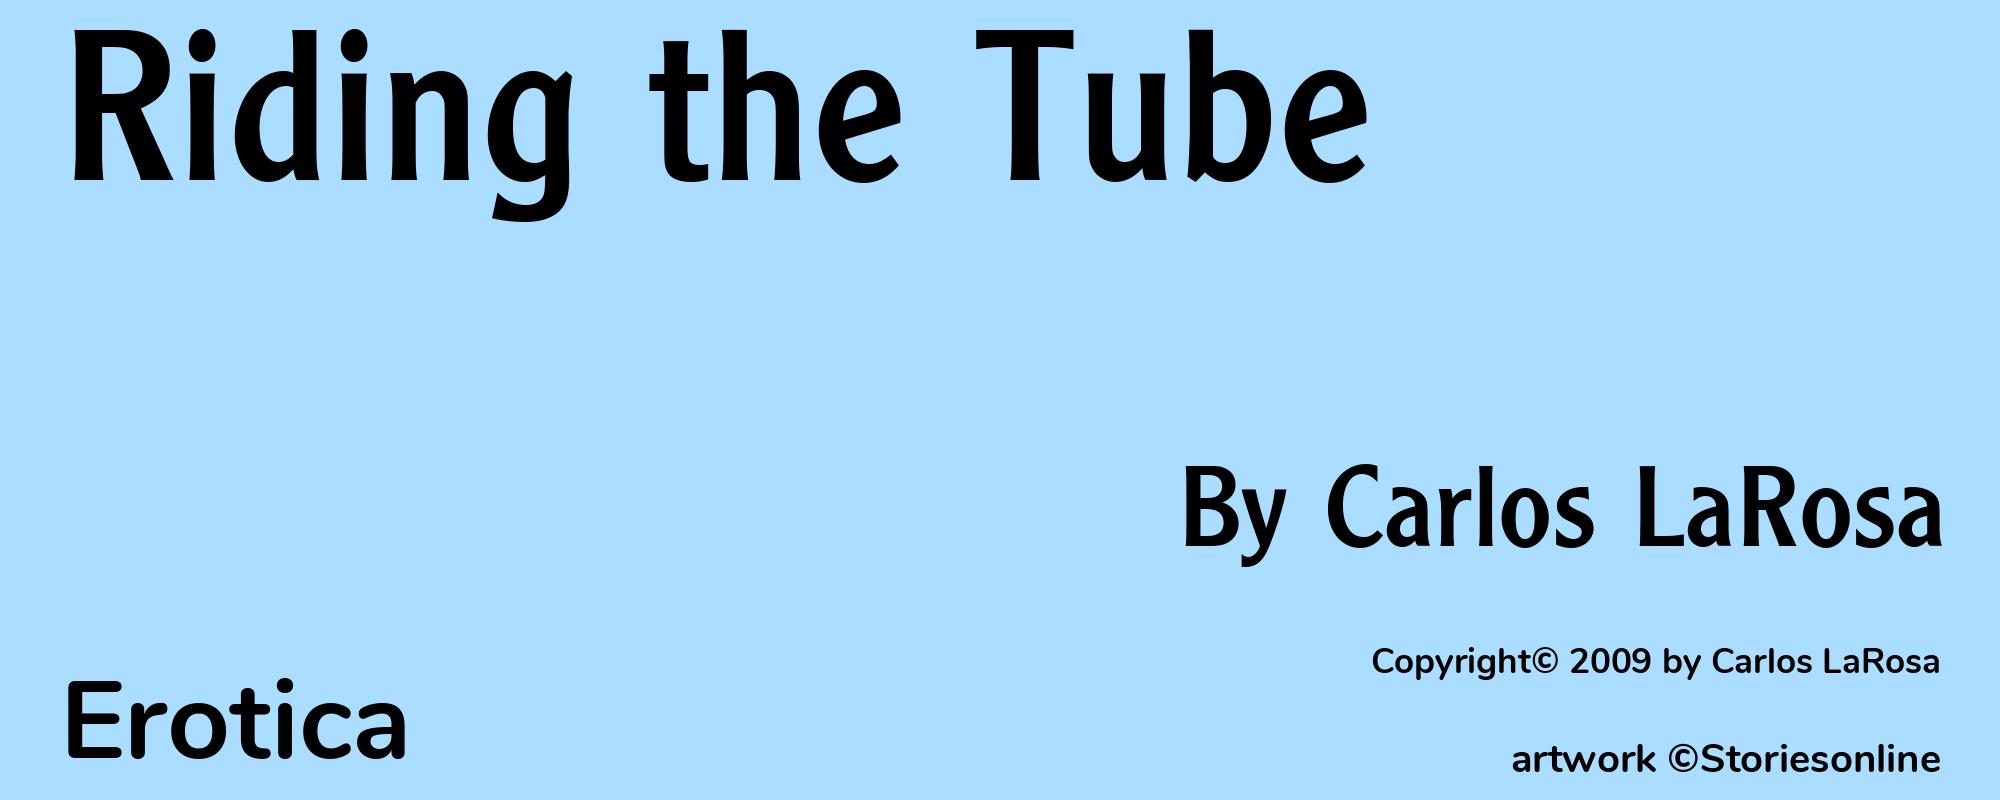 Riding the Tube - Cover